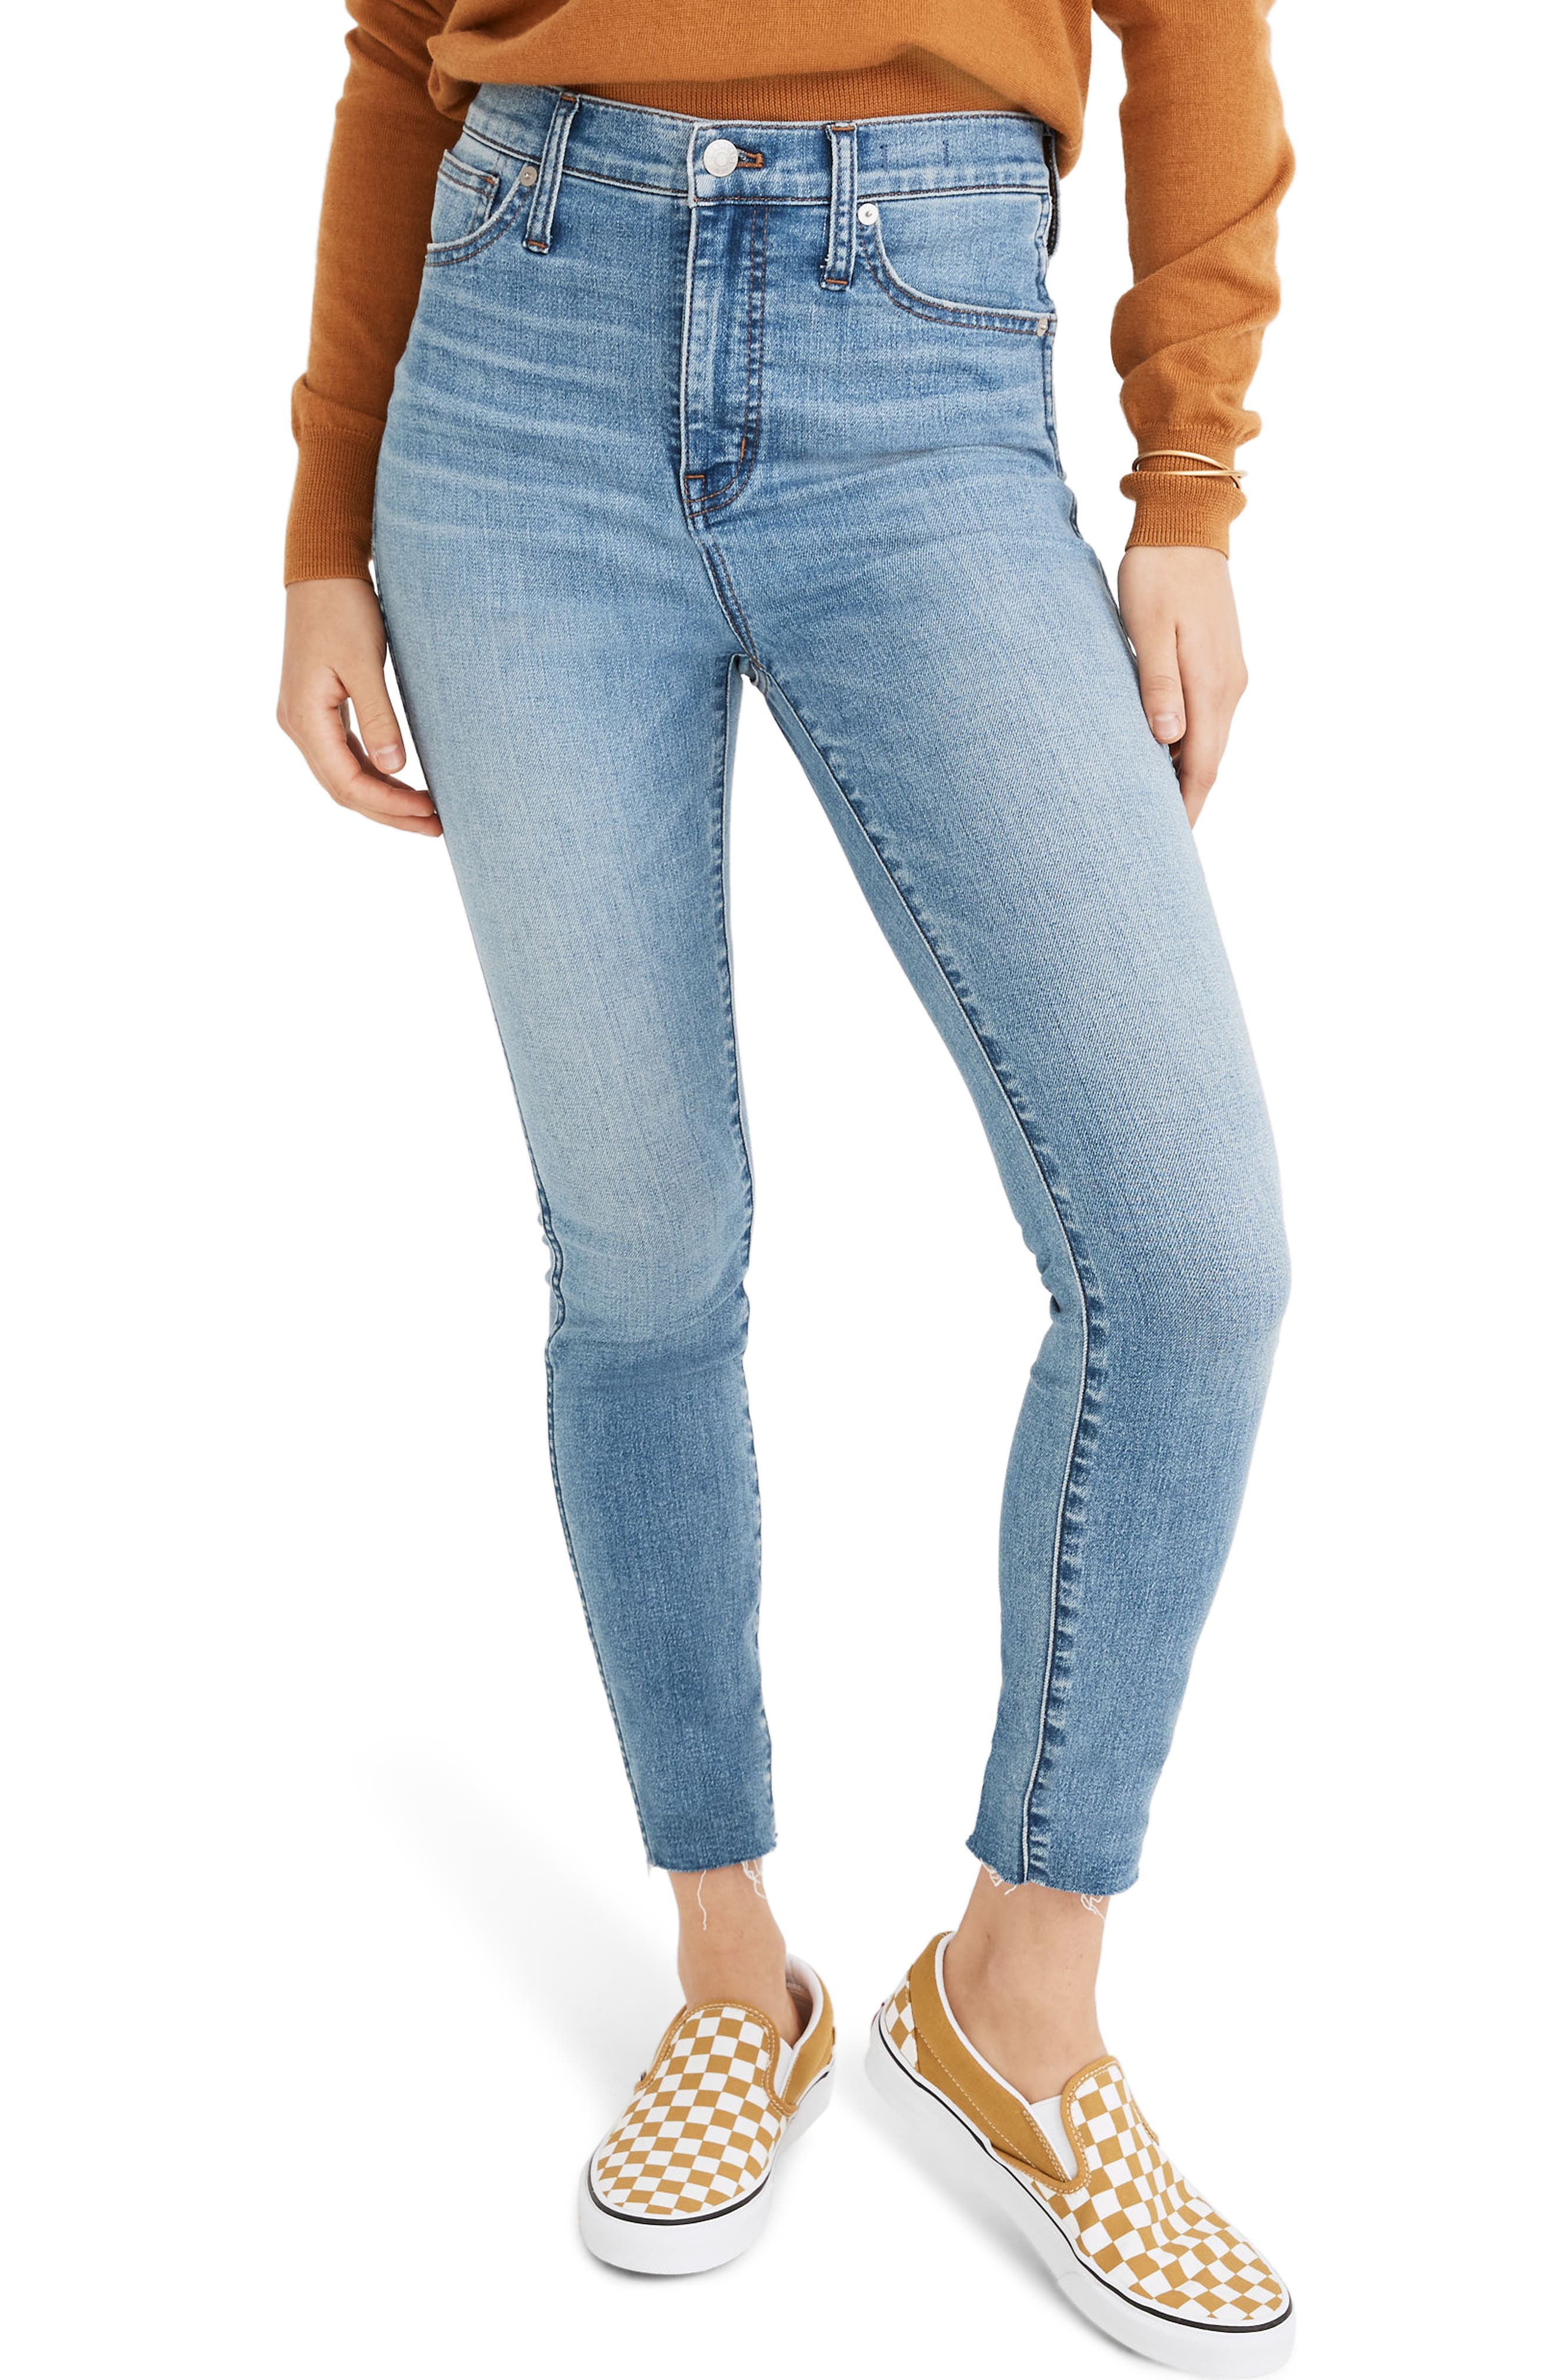 madewell jean discount